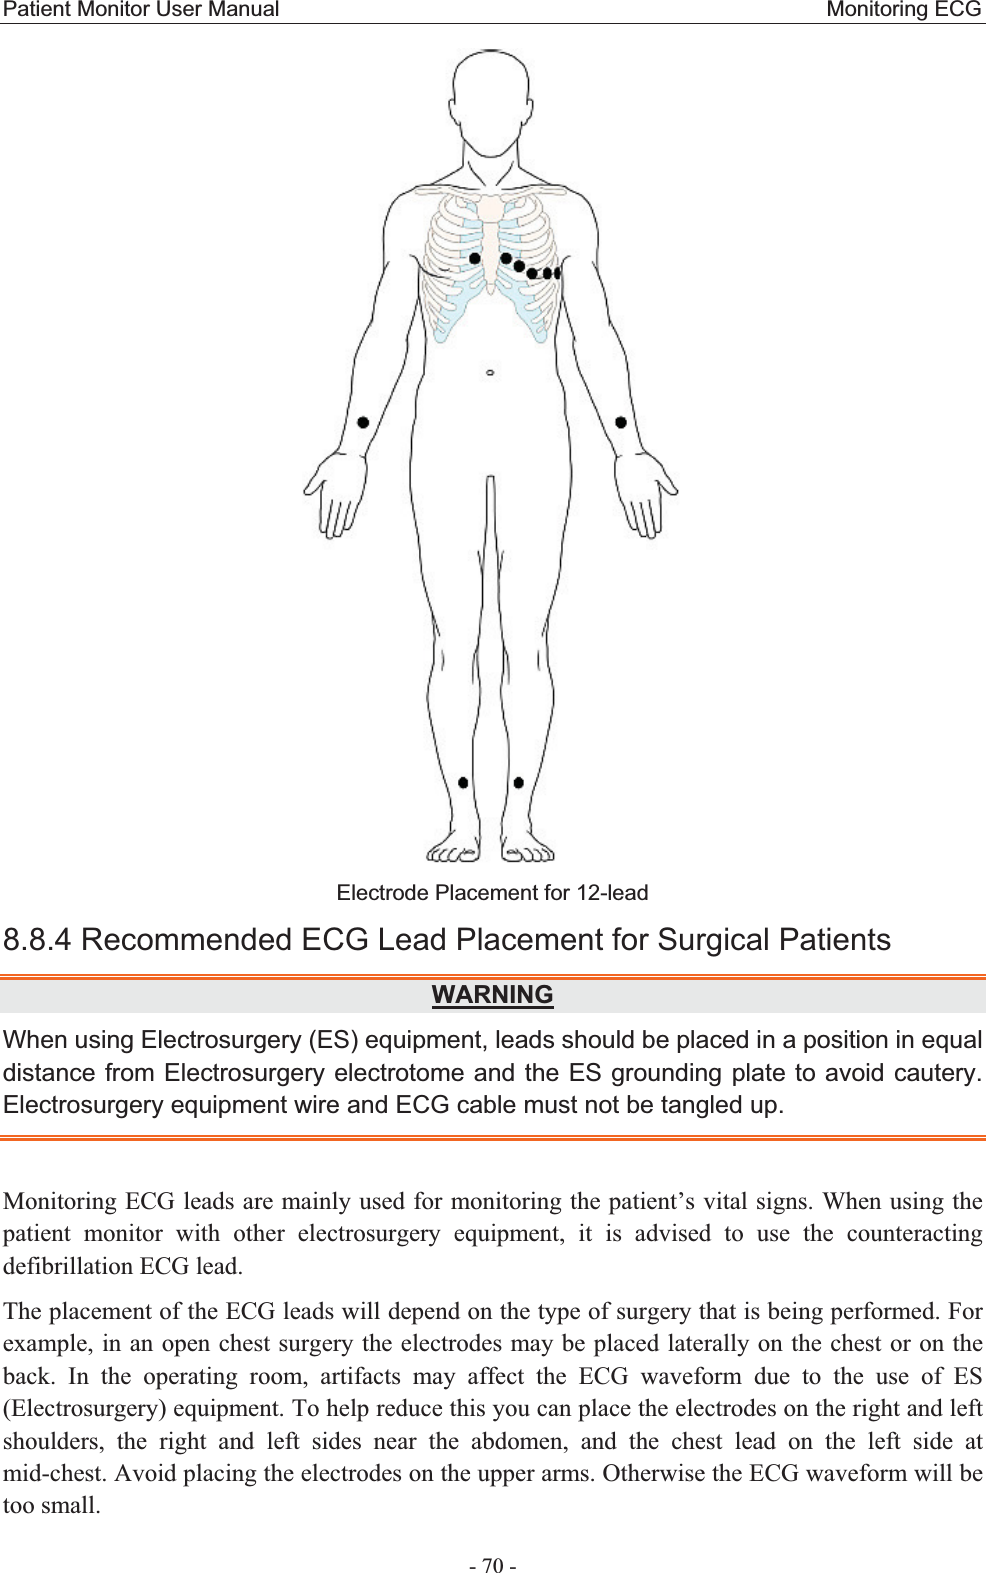 Patient Monitor User Manual                                                  Monitoring ECG  - 70 - Electrode Placement for 12-lead   8.8.4 Recommended ECG Lead Placement for Surgical PatientsWARNINGWhen using Electrosurgery (ES) equipment, leads should be placed in a position in equal distance from Electrosurgery electrotome and the ES grounding plate to avoid cautery. Electrosurgery equipment wire and ECG cable must not be tangled up. Monitoring ECG leads are mainly used for monitoring the patient’s vital signs. When using the patient monitor with other electrosurgery equipment, it is advised to use the counteracting defibrillation ECG lead. The placement of the ECG leads will depend on the type of surgery that is being performed. For example, in an open chest surgery the electrodes may be placed laterally on the chest or on the back. In the operating room, artifacts may affect the ECG waveform due to the use of ES (Electrosurgery) equipment. To help reduce this you can place the electrodes on the right and leftshoulders, the right and left sides near the abdomen, and the chest lead on the left side at mid-chest. Avoid placing the electrodes on the upper arms. Otherwise the ECG waveform will be too small. 